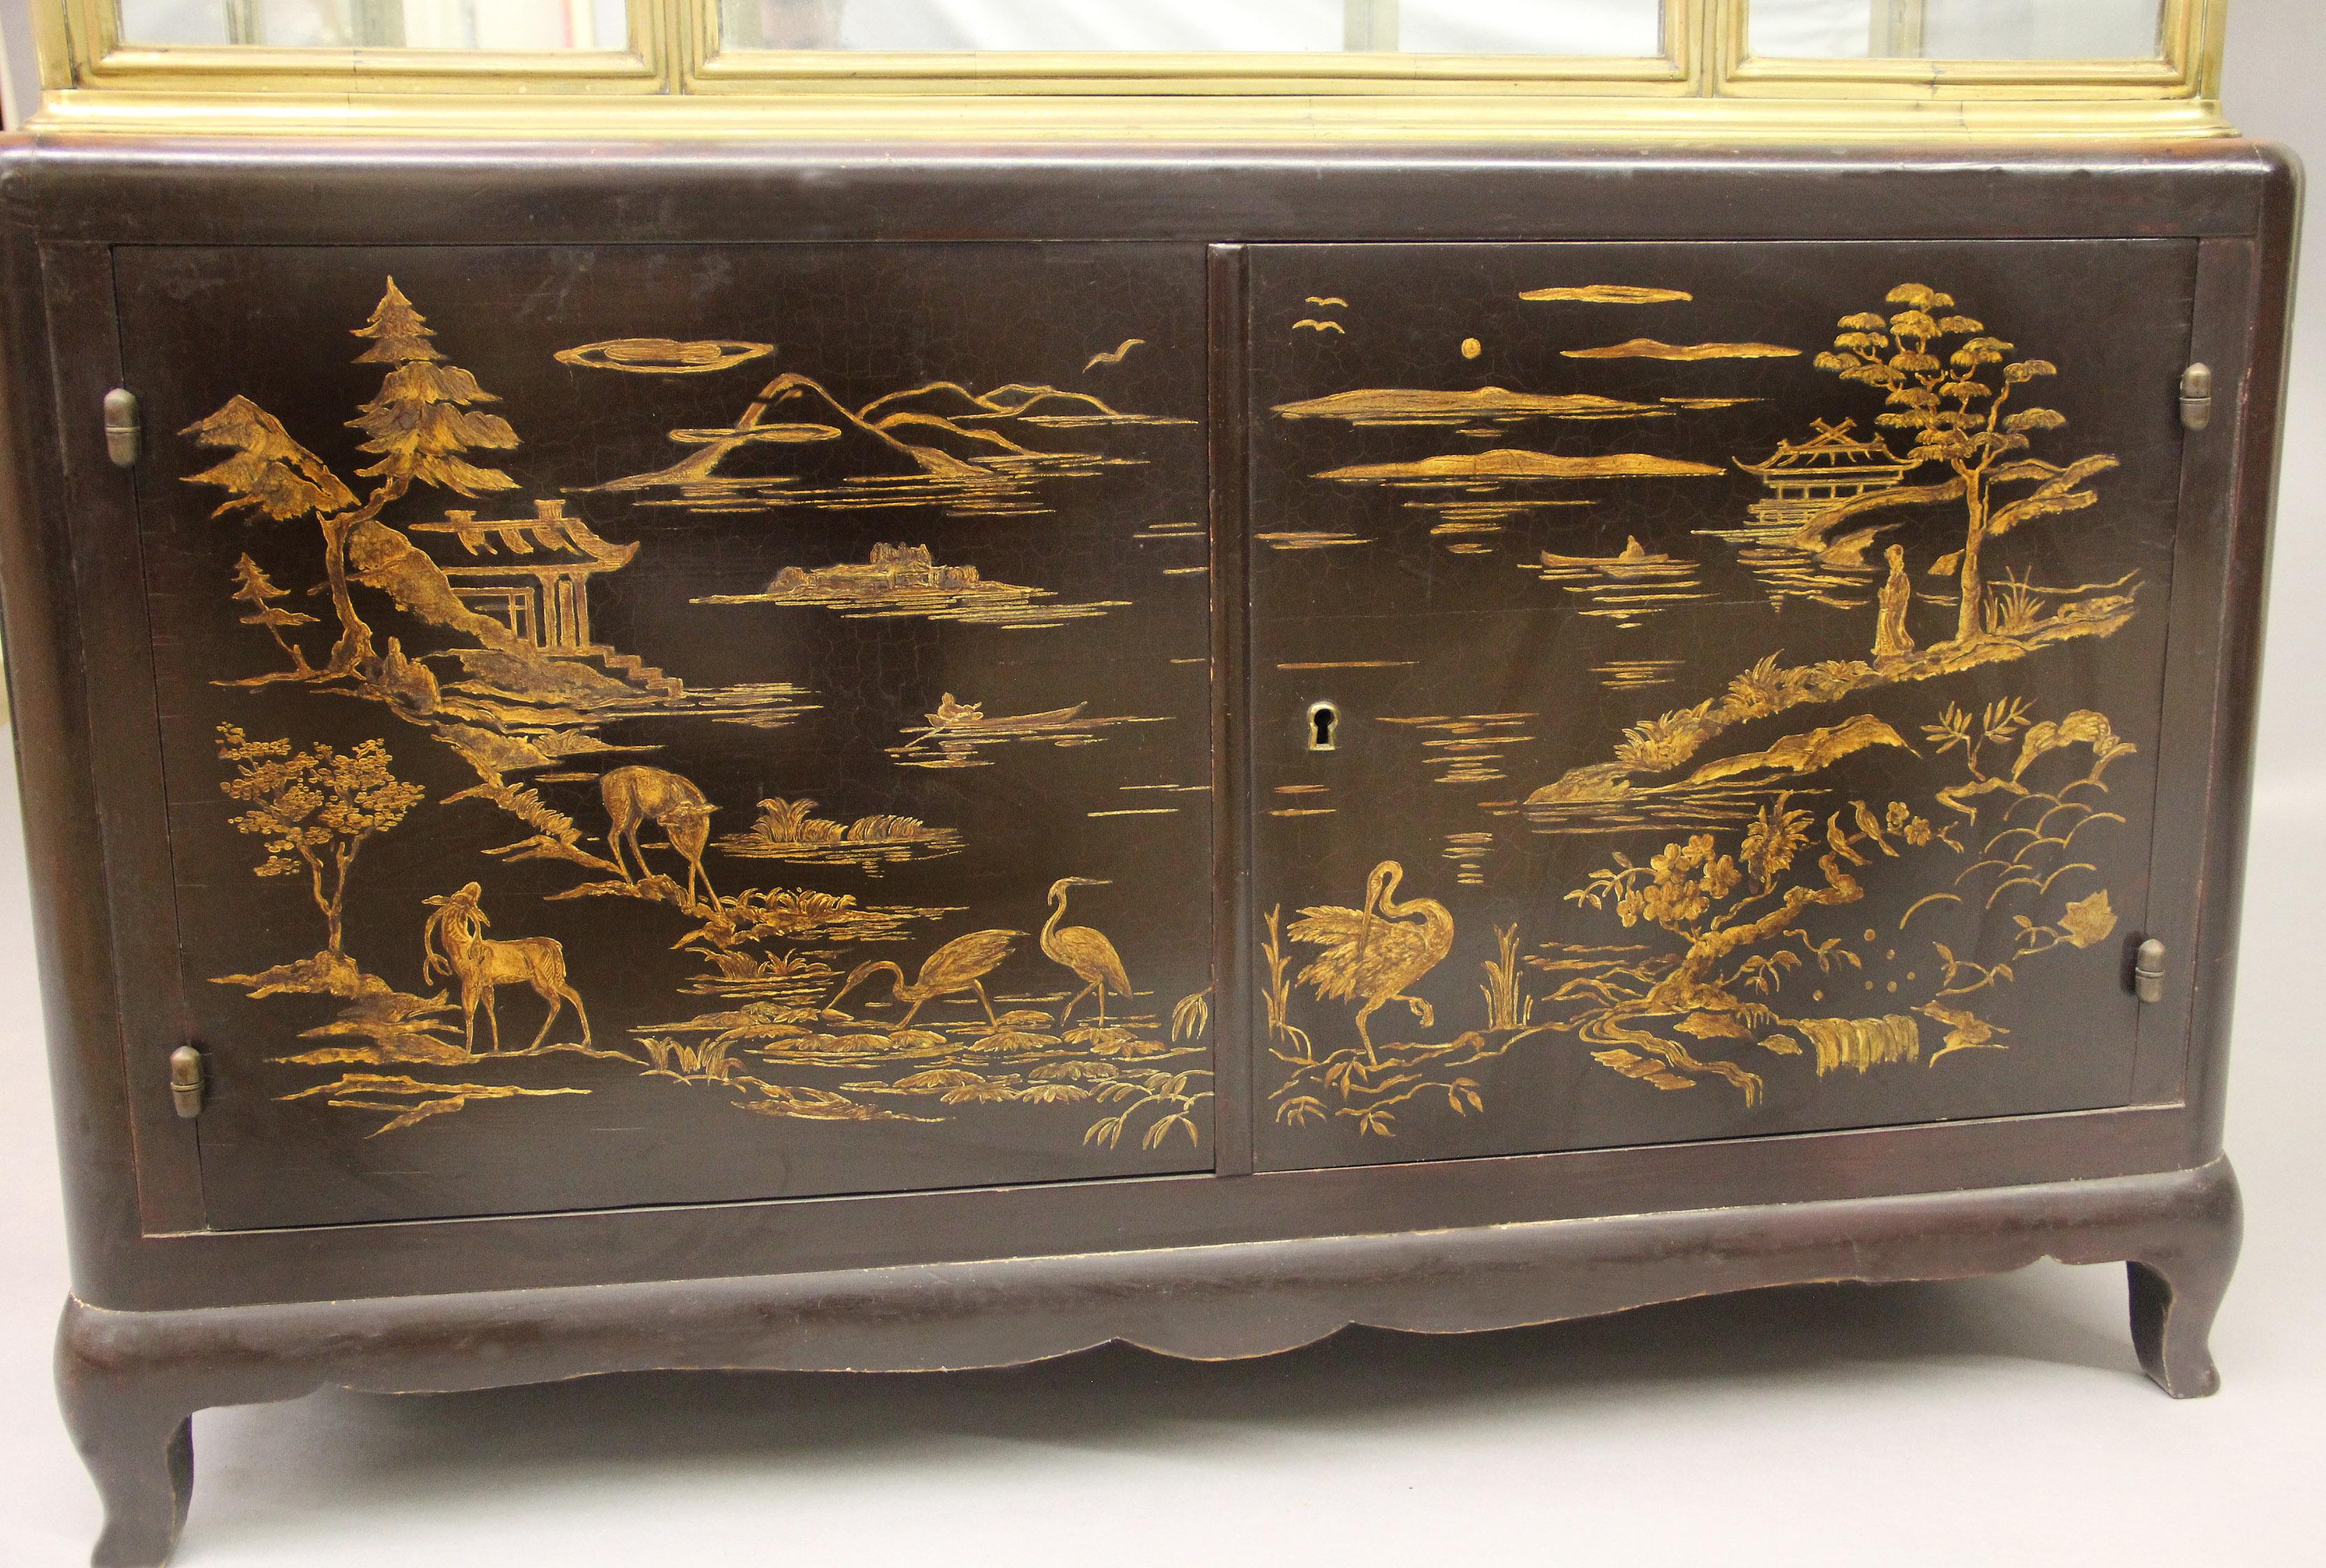 An interesting late 19th century transitional style gilt bronze and lacquer vitrine cabinet.

The large gilt bronze and all glass single door vitrine above a fine two door lacquered cabinet designed as a landscape scene with people, deer and